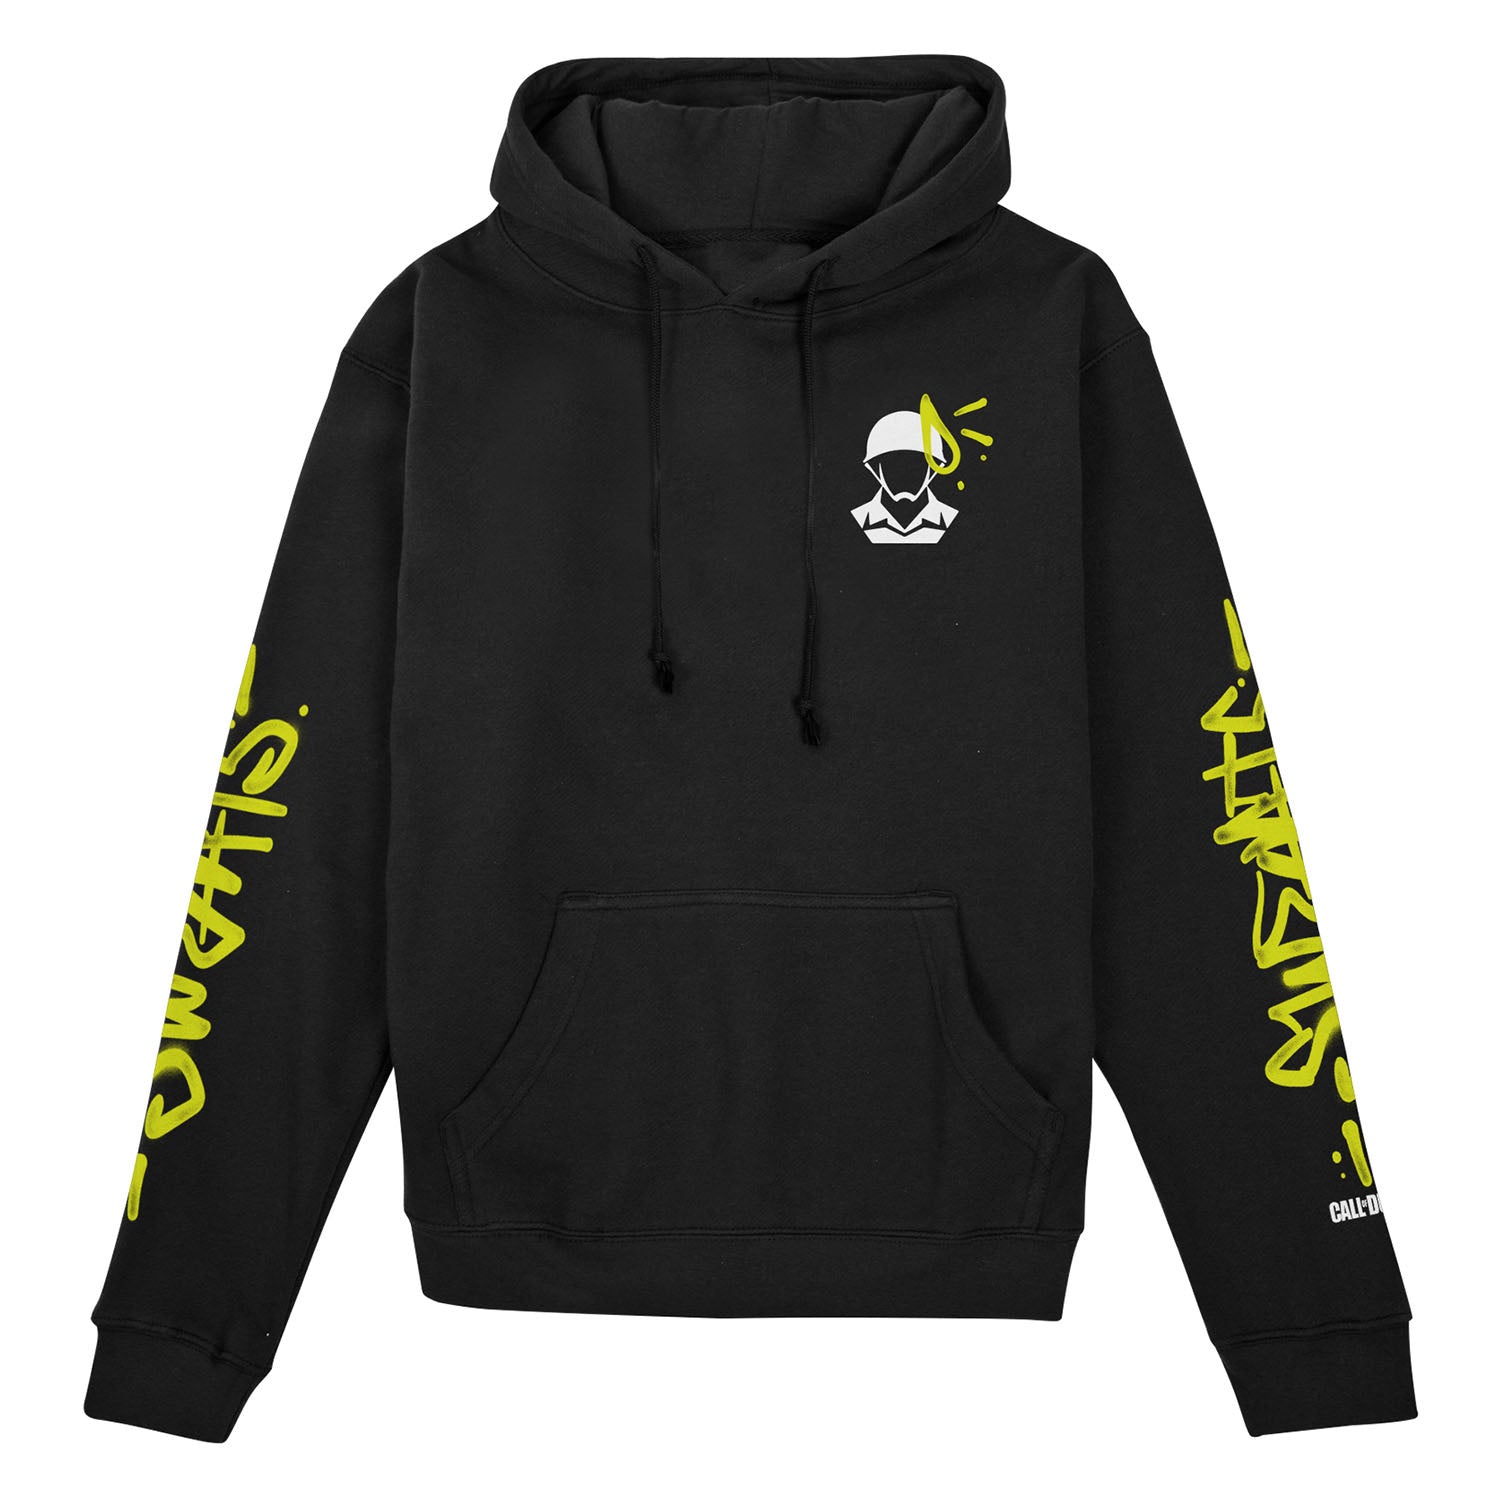 Call of Duty Black Sweats Hoodie - Front View